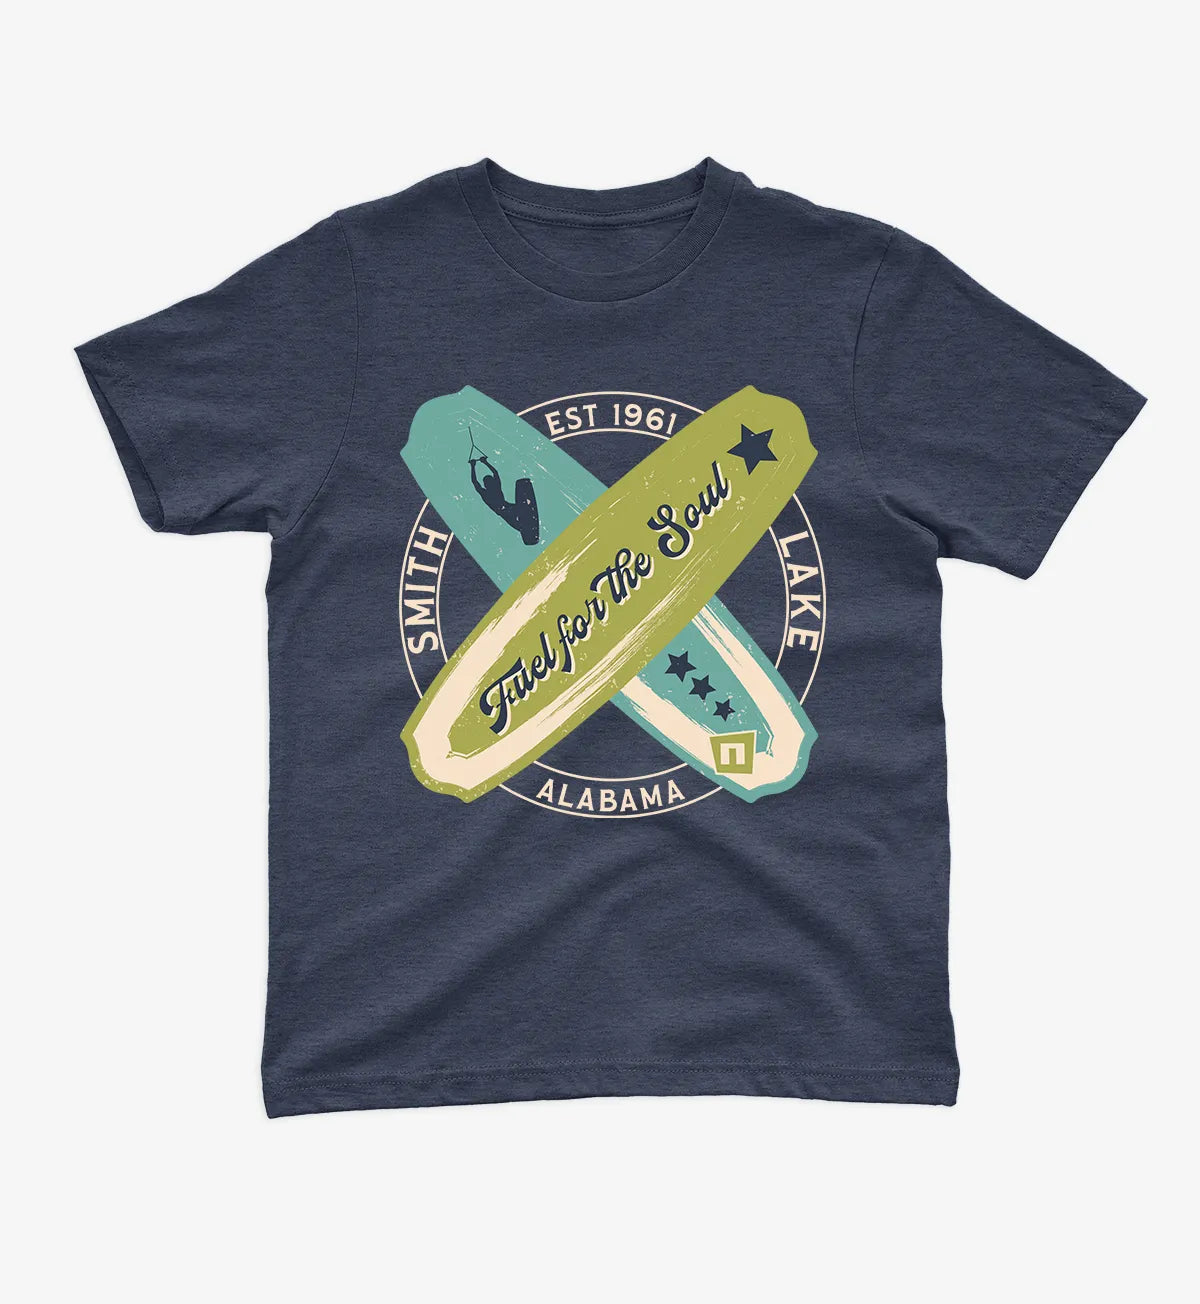 YOUTH Crossed Boards - Smith Lake Tshirt